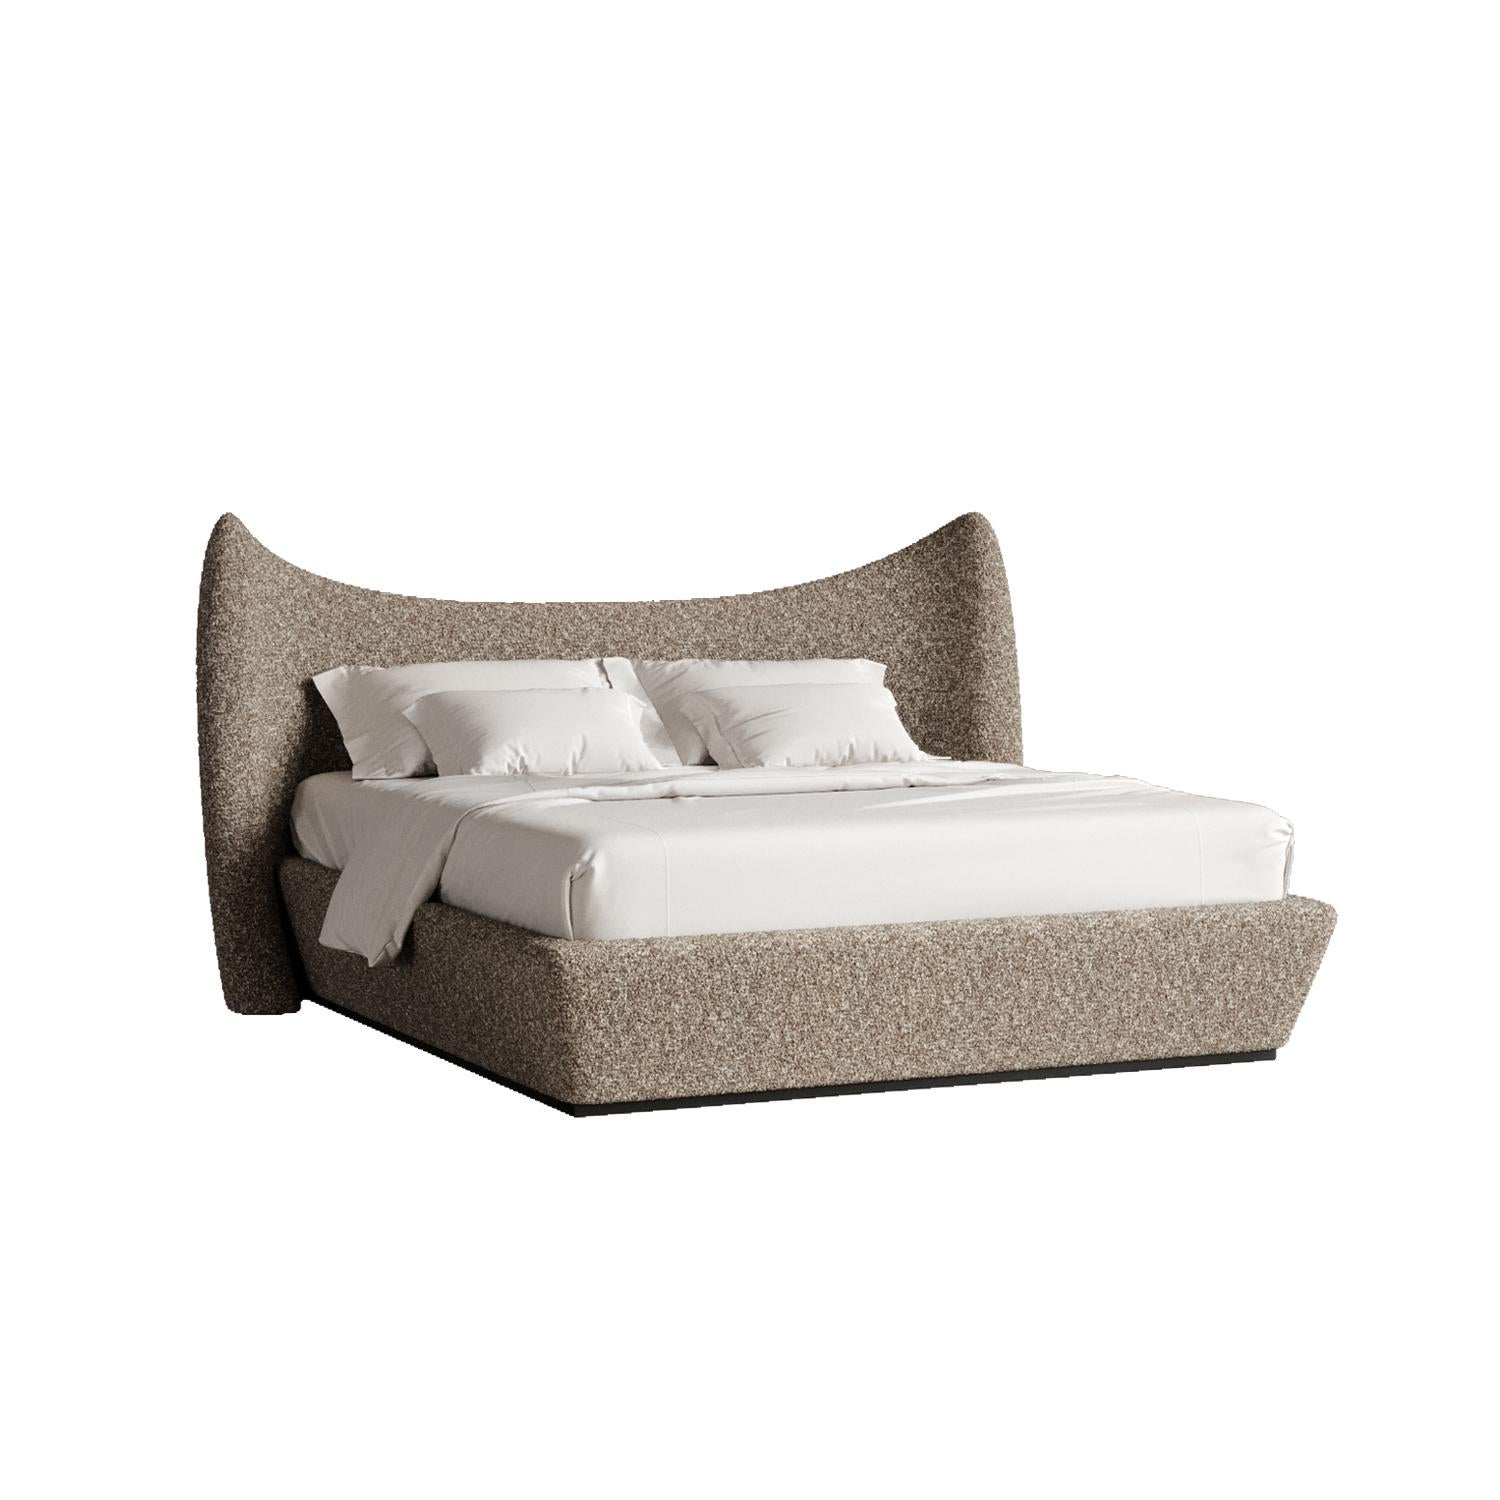 Beige Memory Bed by Plyus Design
Dimensions: D 235 x W 245 x H 125 cm
Materials:  Wood, HR foam, polyester wadding, fabric upholstery
Also available in a variety of colors. 

“Memory” Bed.
Collection 